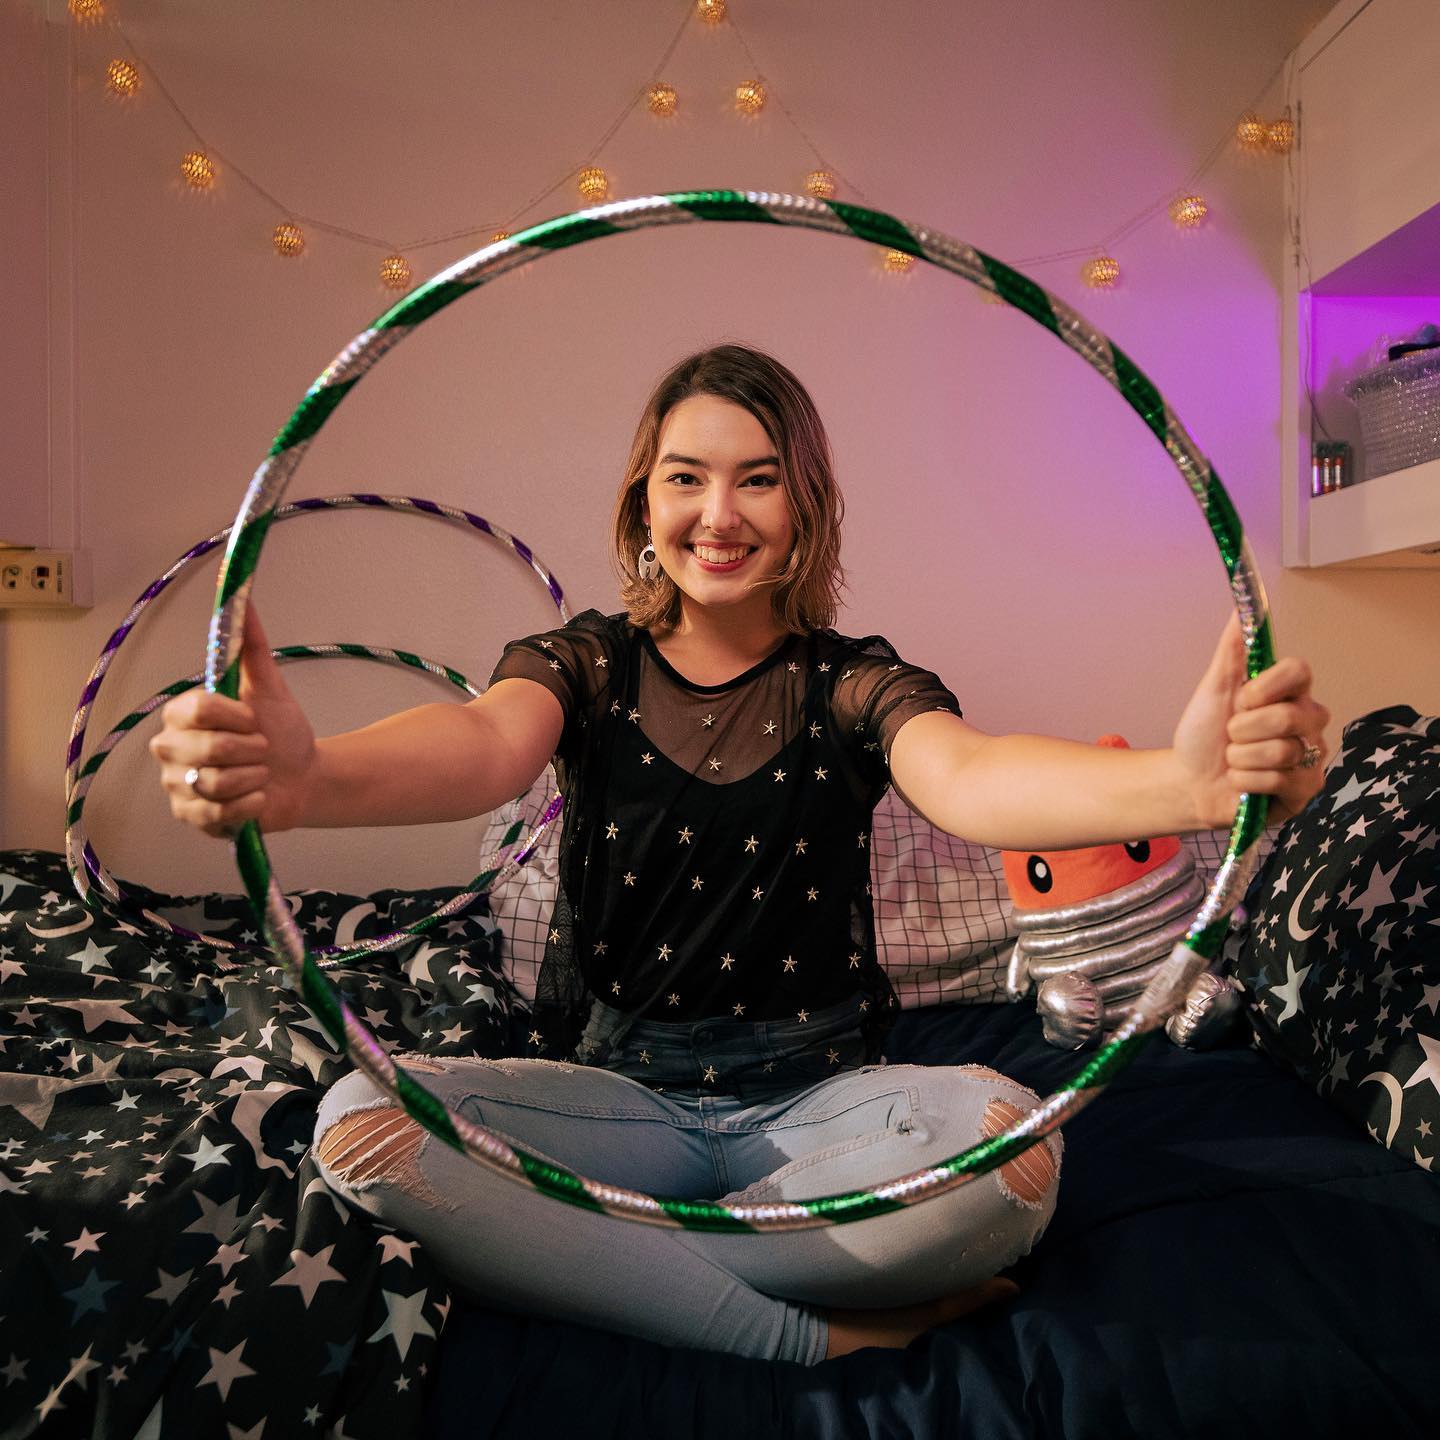 The Performer. Meet Olivia and one of her many hula hoops. 

Texas A&M: Where You Belong Campaign.

Photographed with the cool Josue Salinas.

#collegestation #texas #school #videoproductioncompany #branding #storytellingphotography #hulahoop #dormroom #smiles